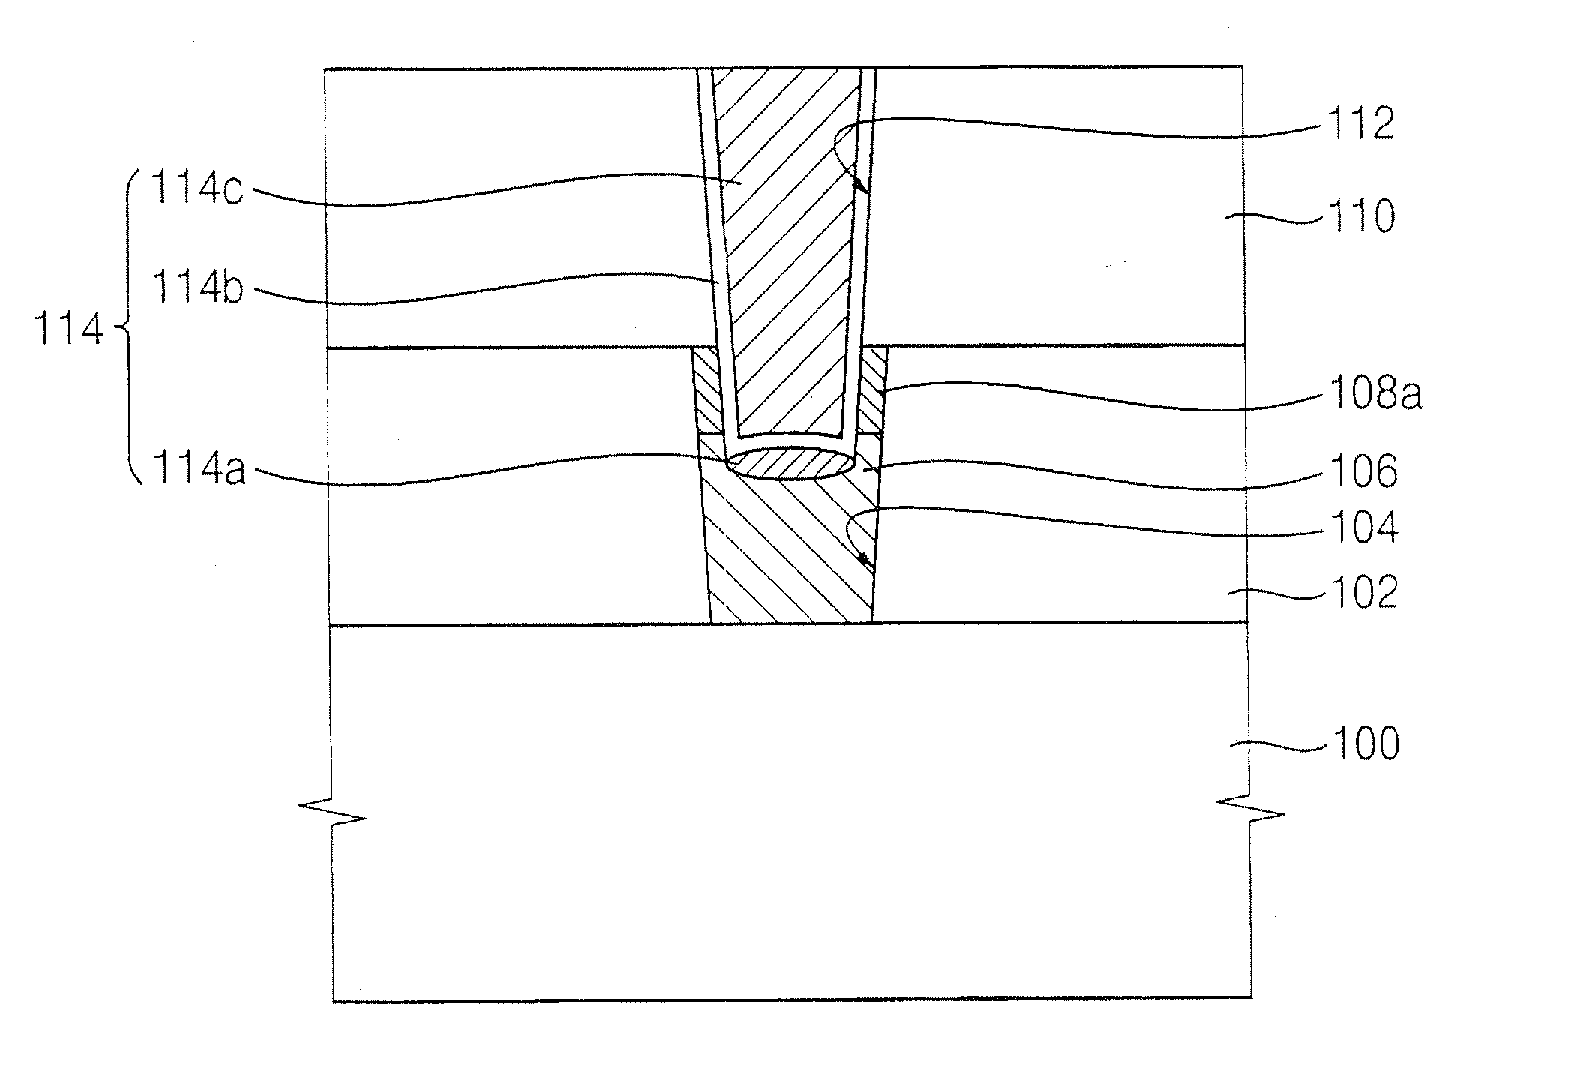 Wiring structure in a semiconductor device, method of forming the wiring structure, semiconductor device including the wiring structure and method of manufacturing the semiconductor device